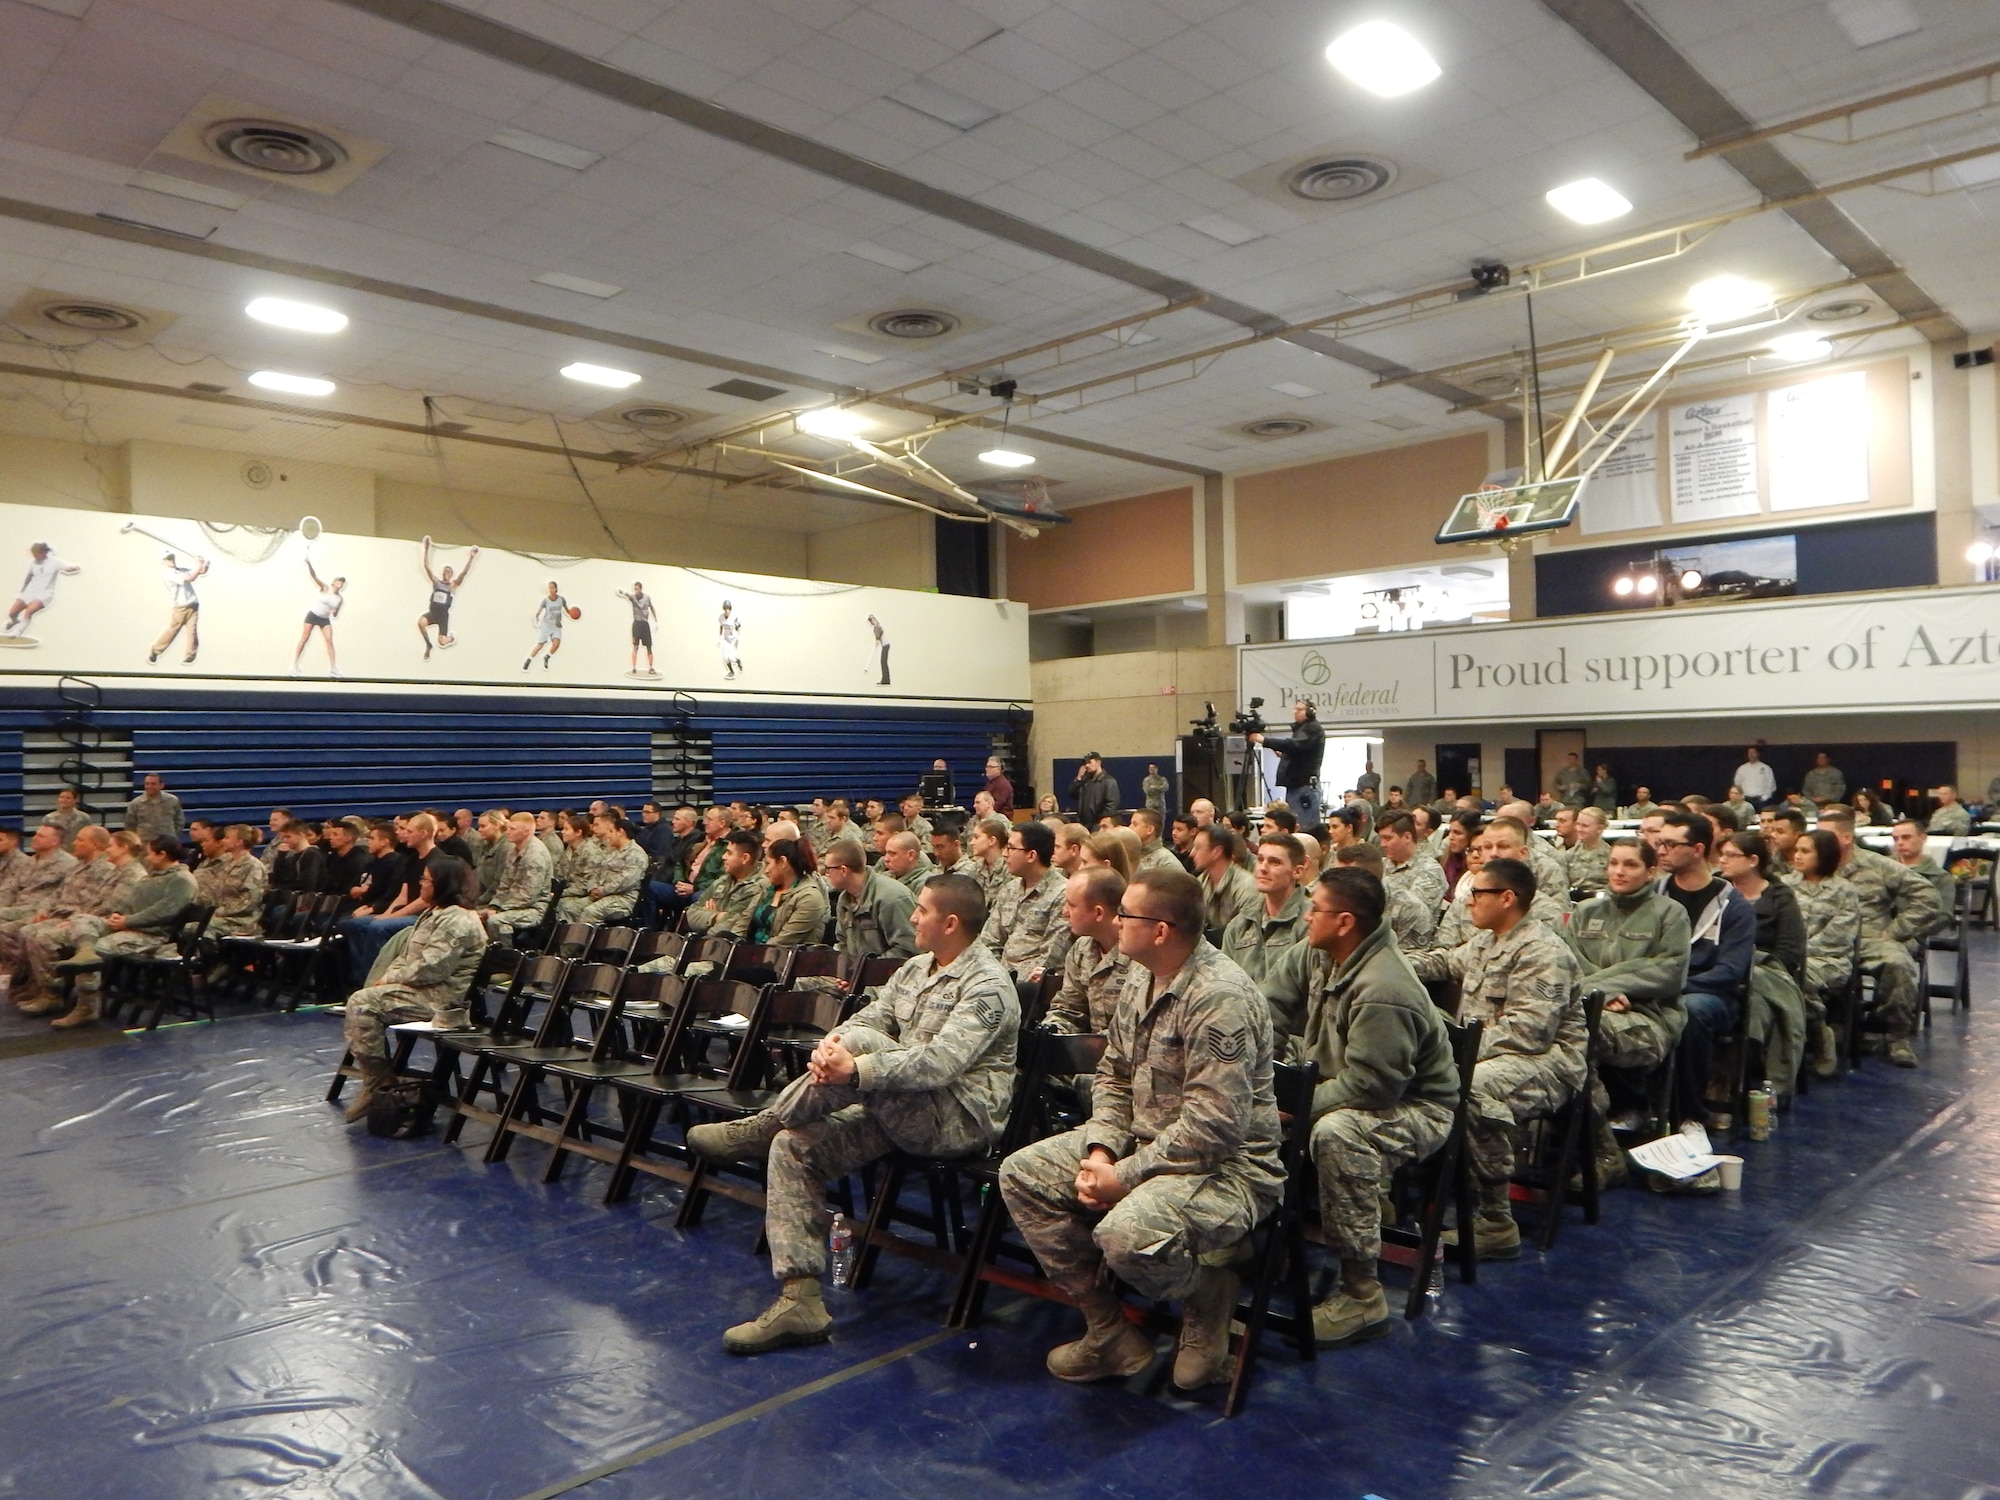 Airmen from the Arizona Air National Guard’s 162nd Wing listen to one of the speaker’s at the 6th annual My Air Guard Incentive Career, or MAGIC event at Pima Community College West Campus Jan. 9-10. The two-day event included presentations on career development, continuing education, mentorship, resiliency, physical and mental health, life insurance and financial guidance. (U.S. Air National Guard photo by 2nd Lt. Lacey Roberts)